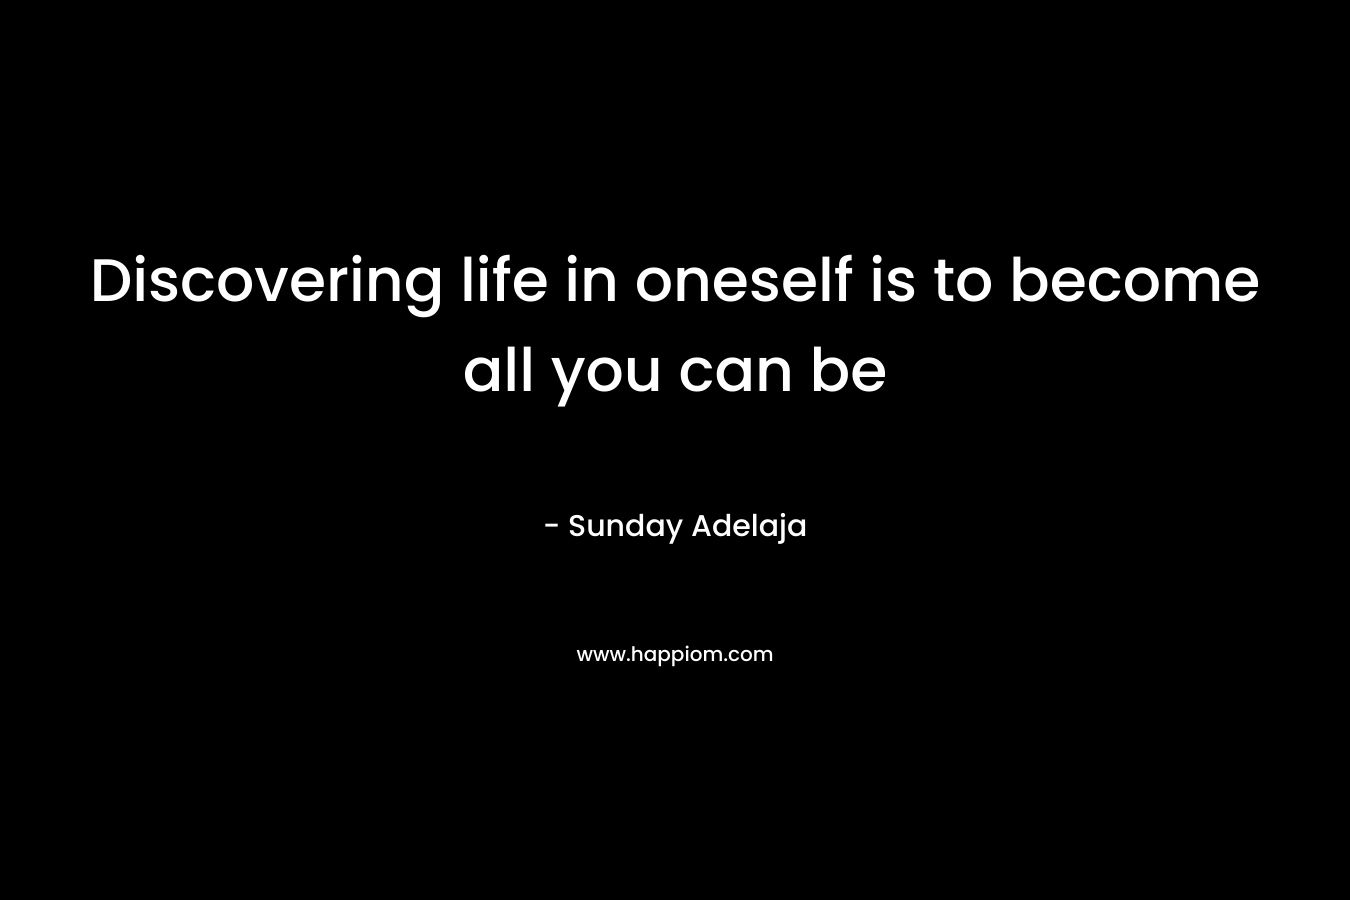 Discovering life in oneself is to become all you can be